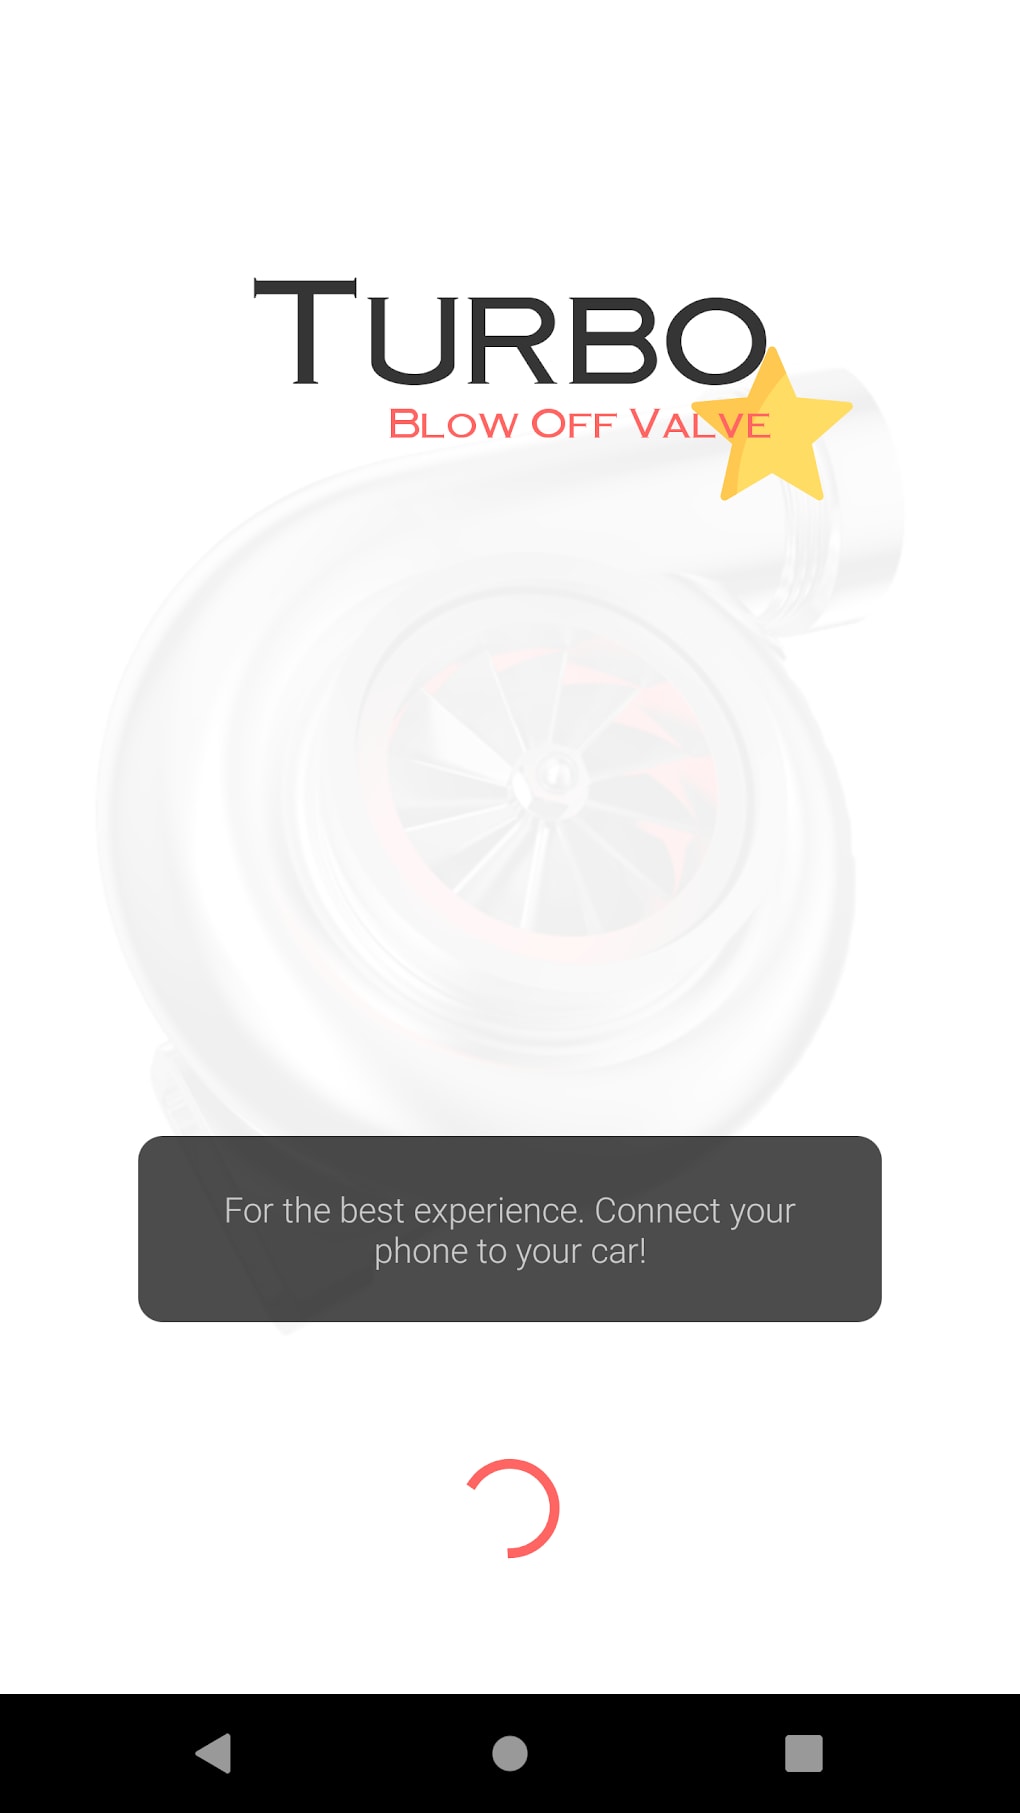 Turbo Blow Off Valve for Android - Download